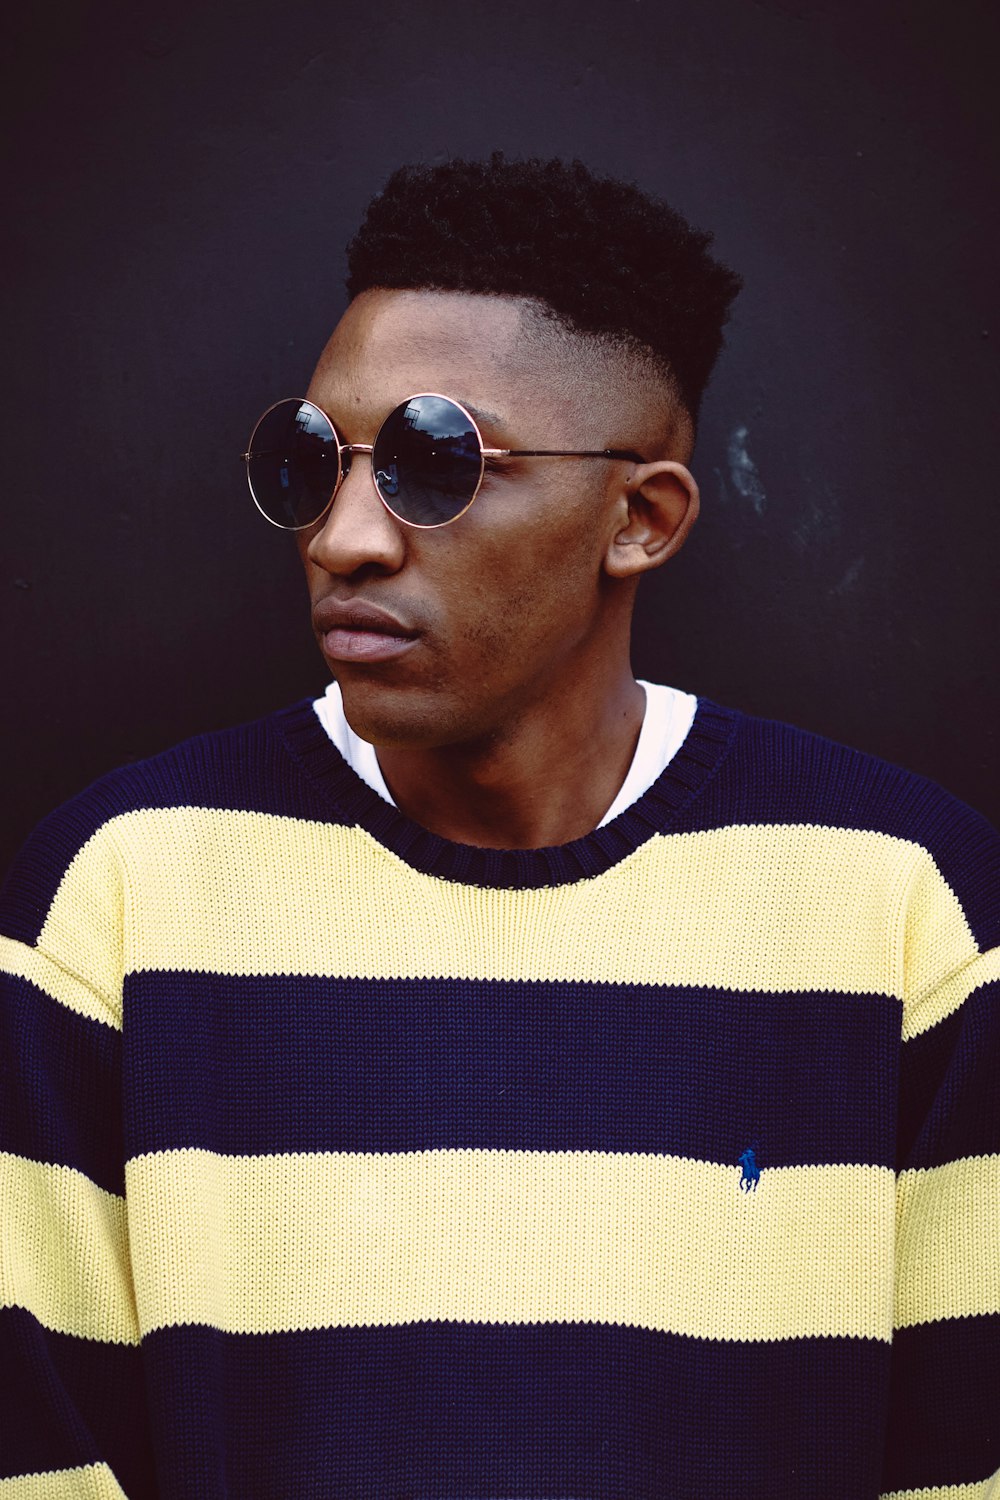 man in blue and white striped crew neck shirt wearing black sunglasses